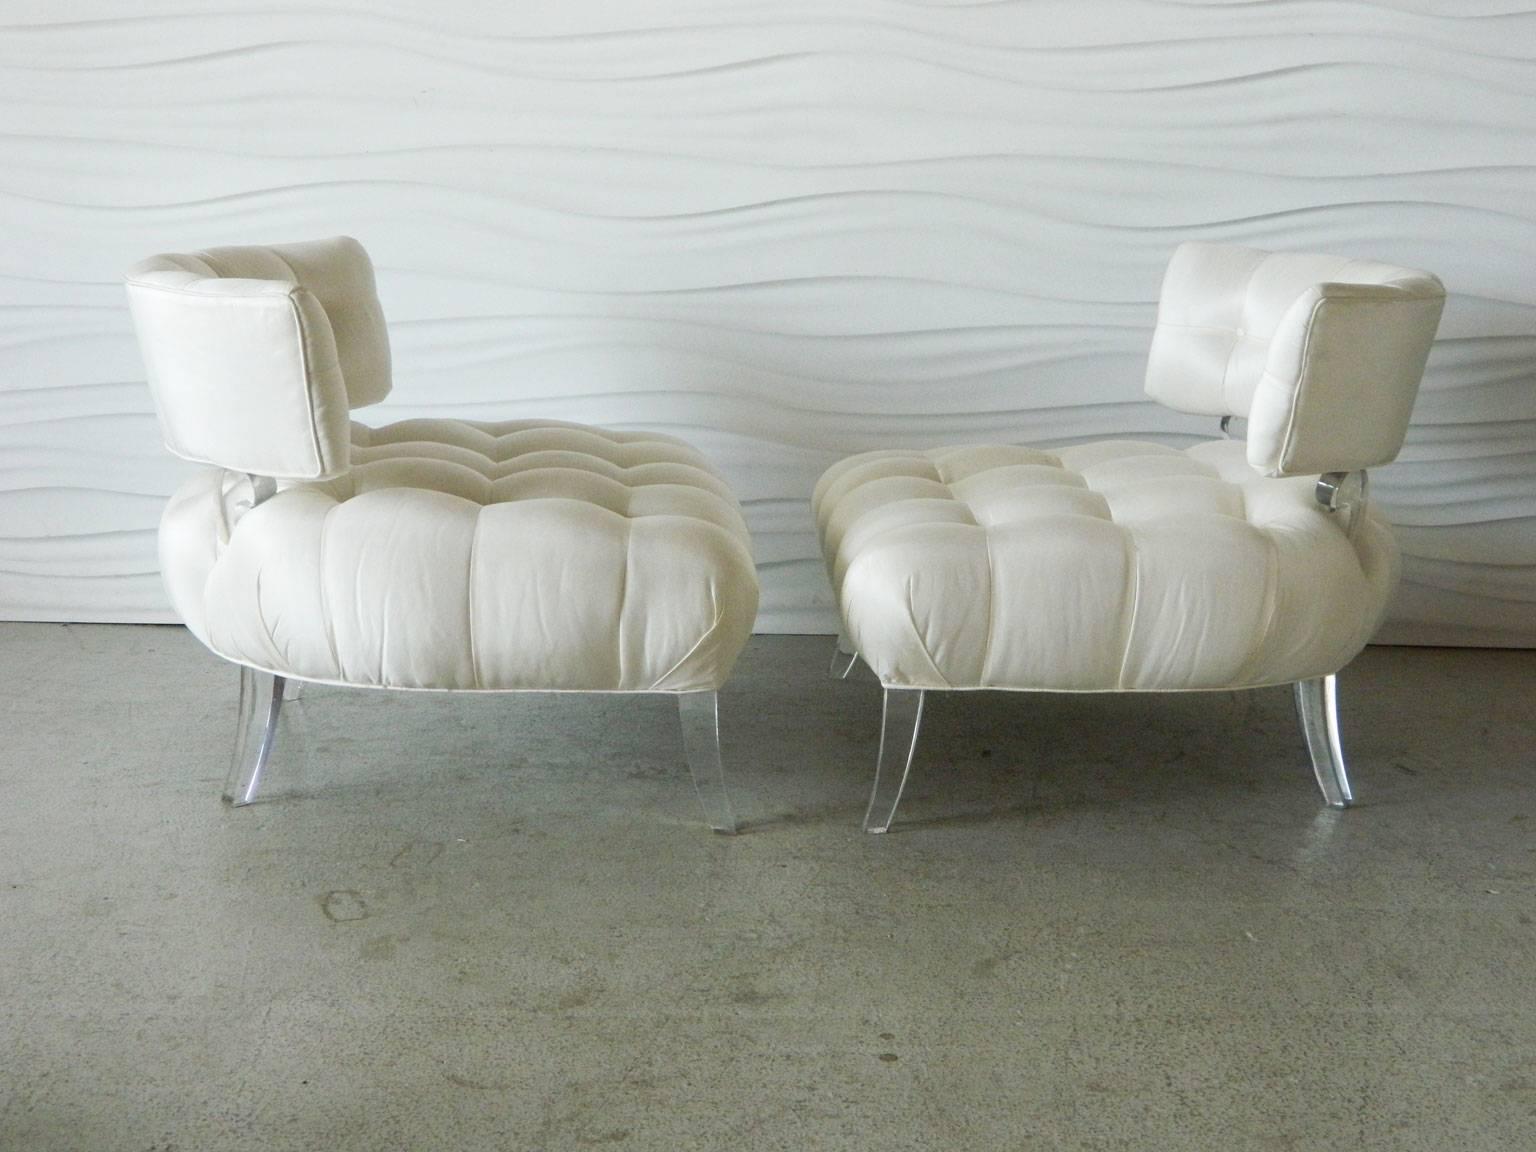 Designed by Lorin Jackson in 1939 for American furniture manufacturer Grosfeld House, this glamorous pair of slipper chairs were part of The Glassics Collection which featured the use of Lucite.

 